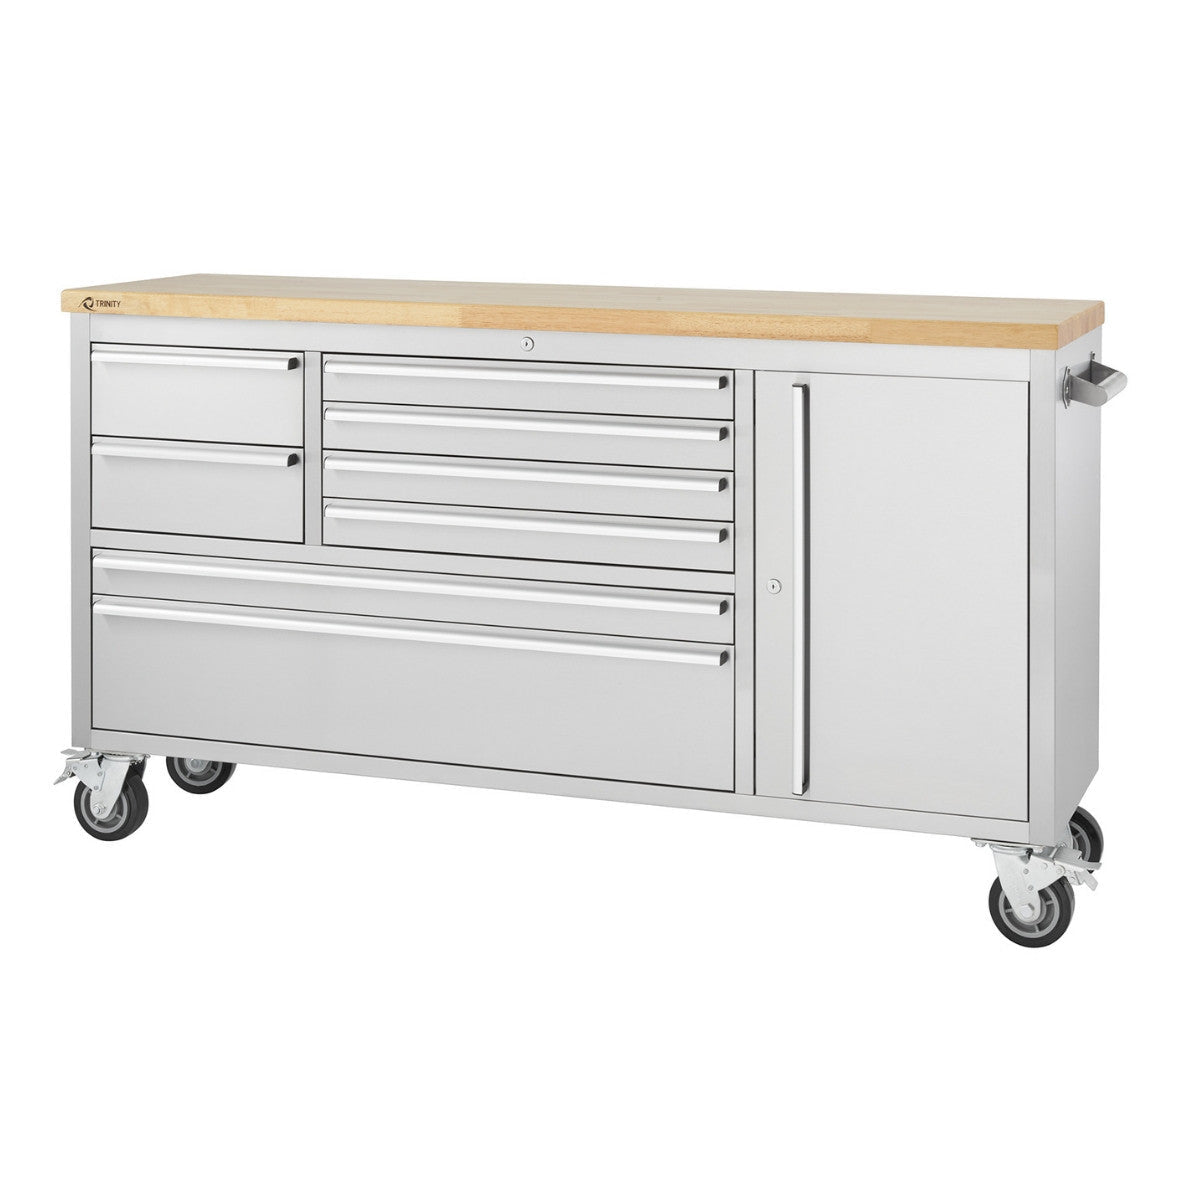 Workbenches - Trinity 66x19 Stainless Steel Rolling Workbench